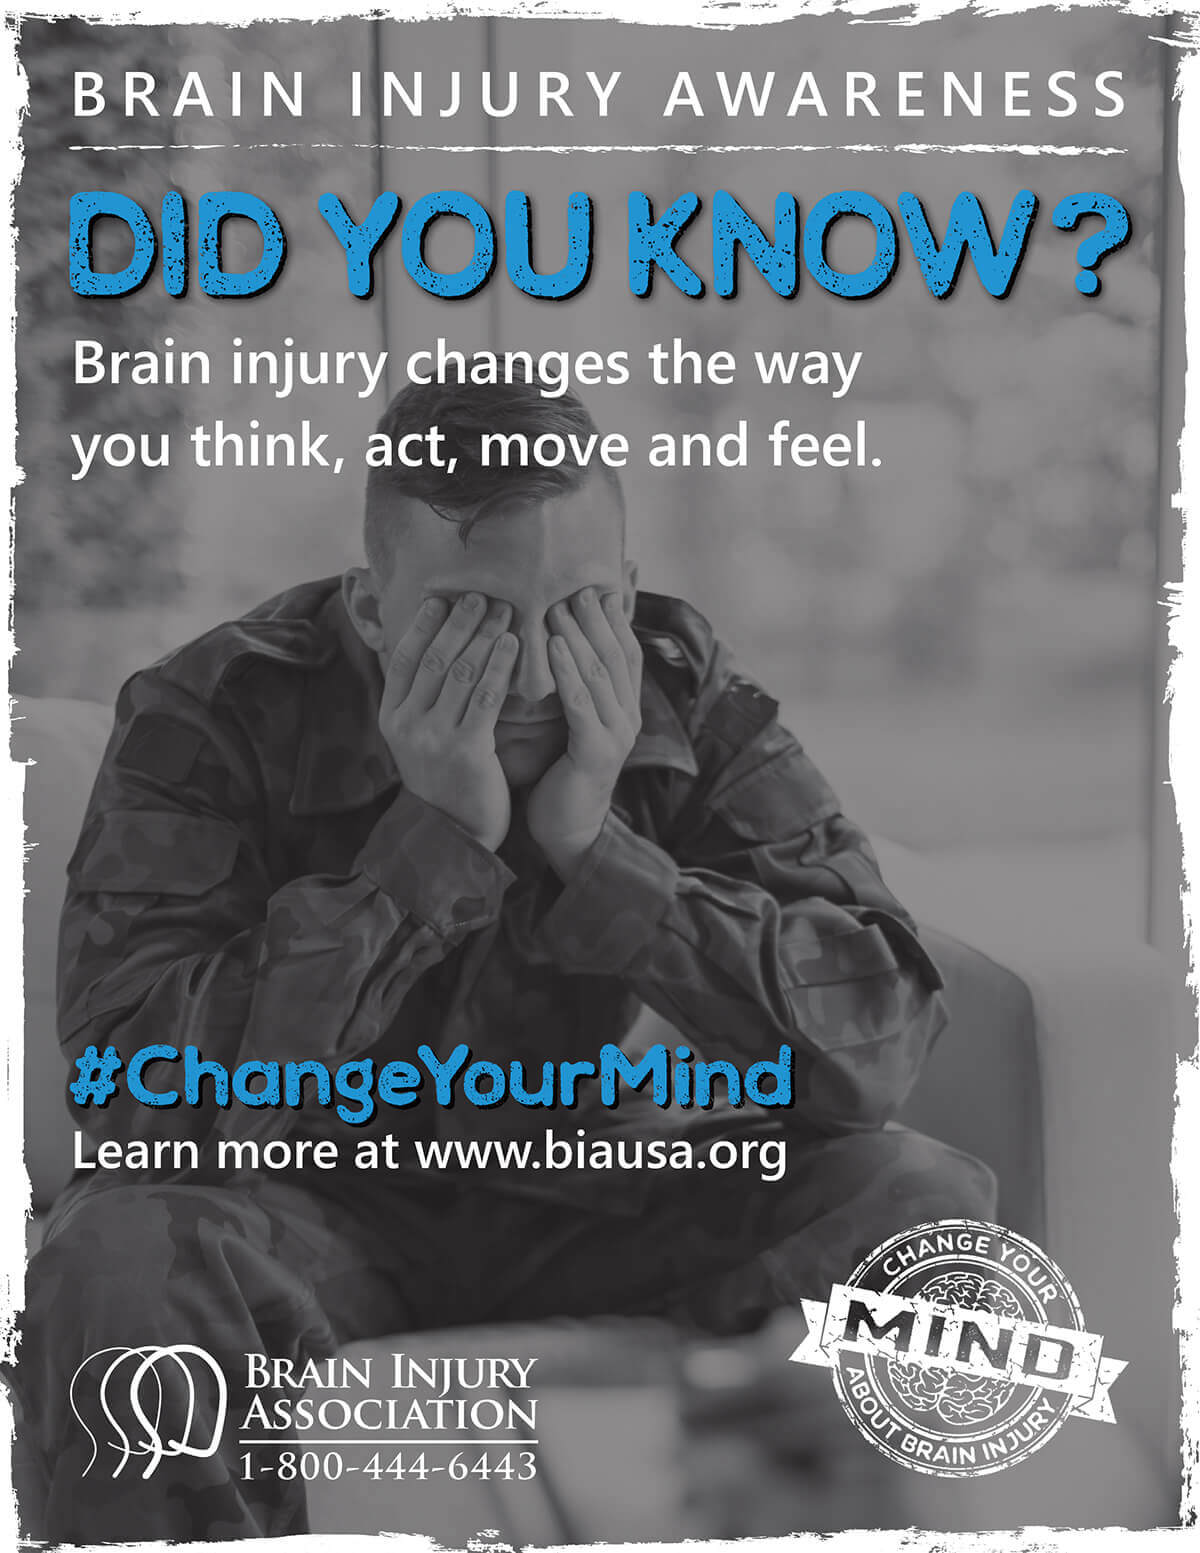 Change Your Mind About Brain Injury